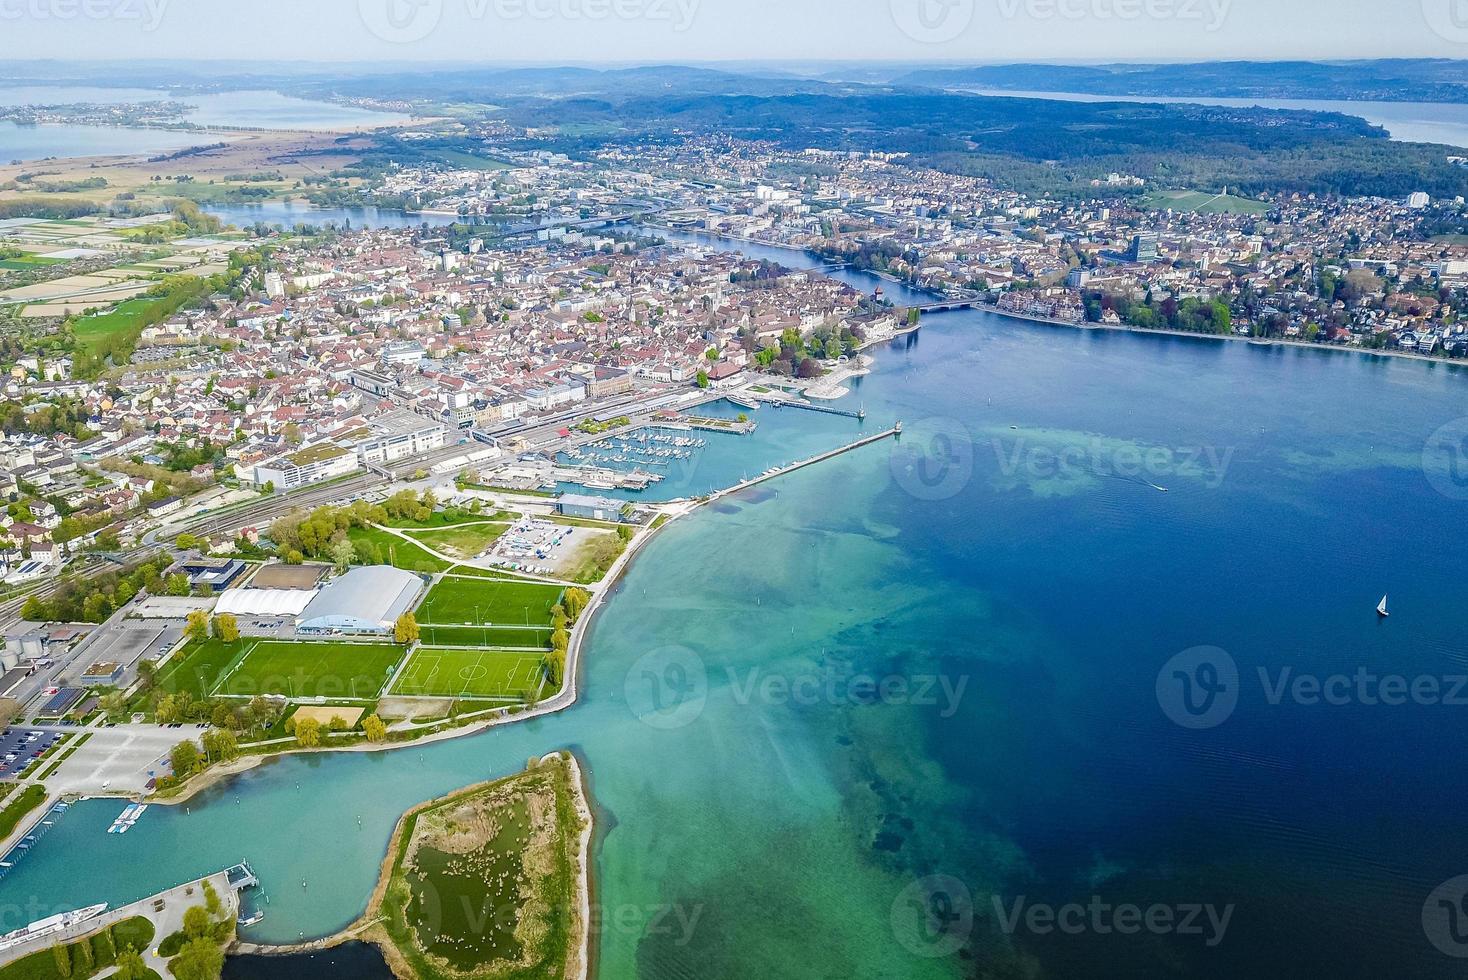 Bodenmeer of Bodensee luchtpanorama in Duitsland foto